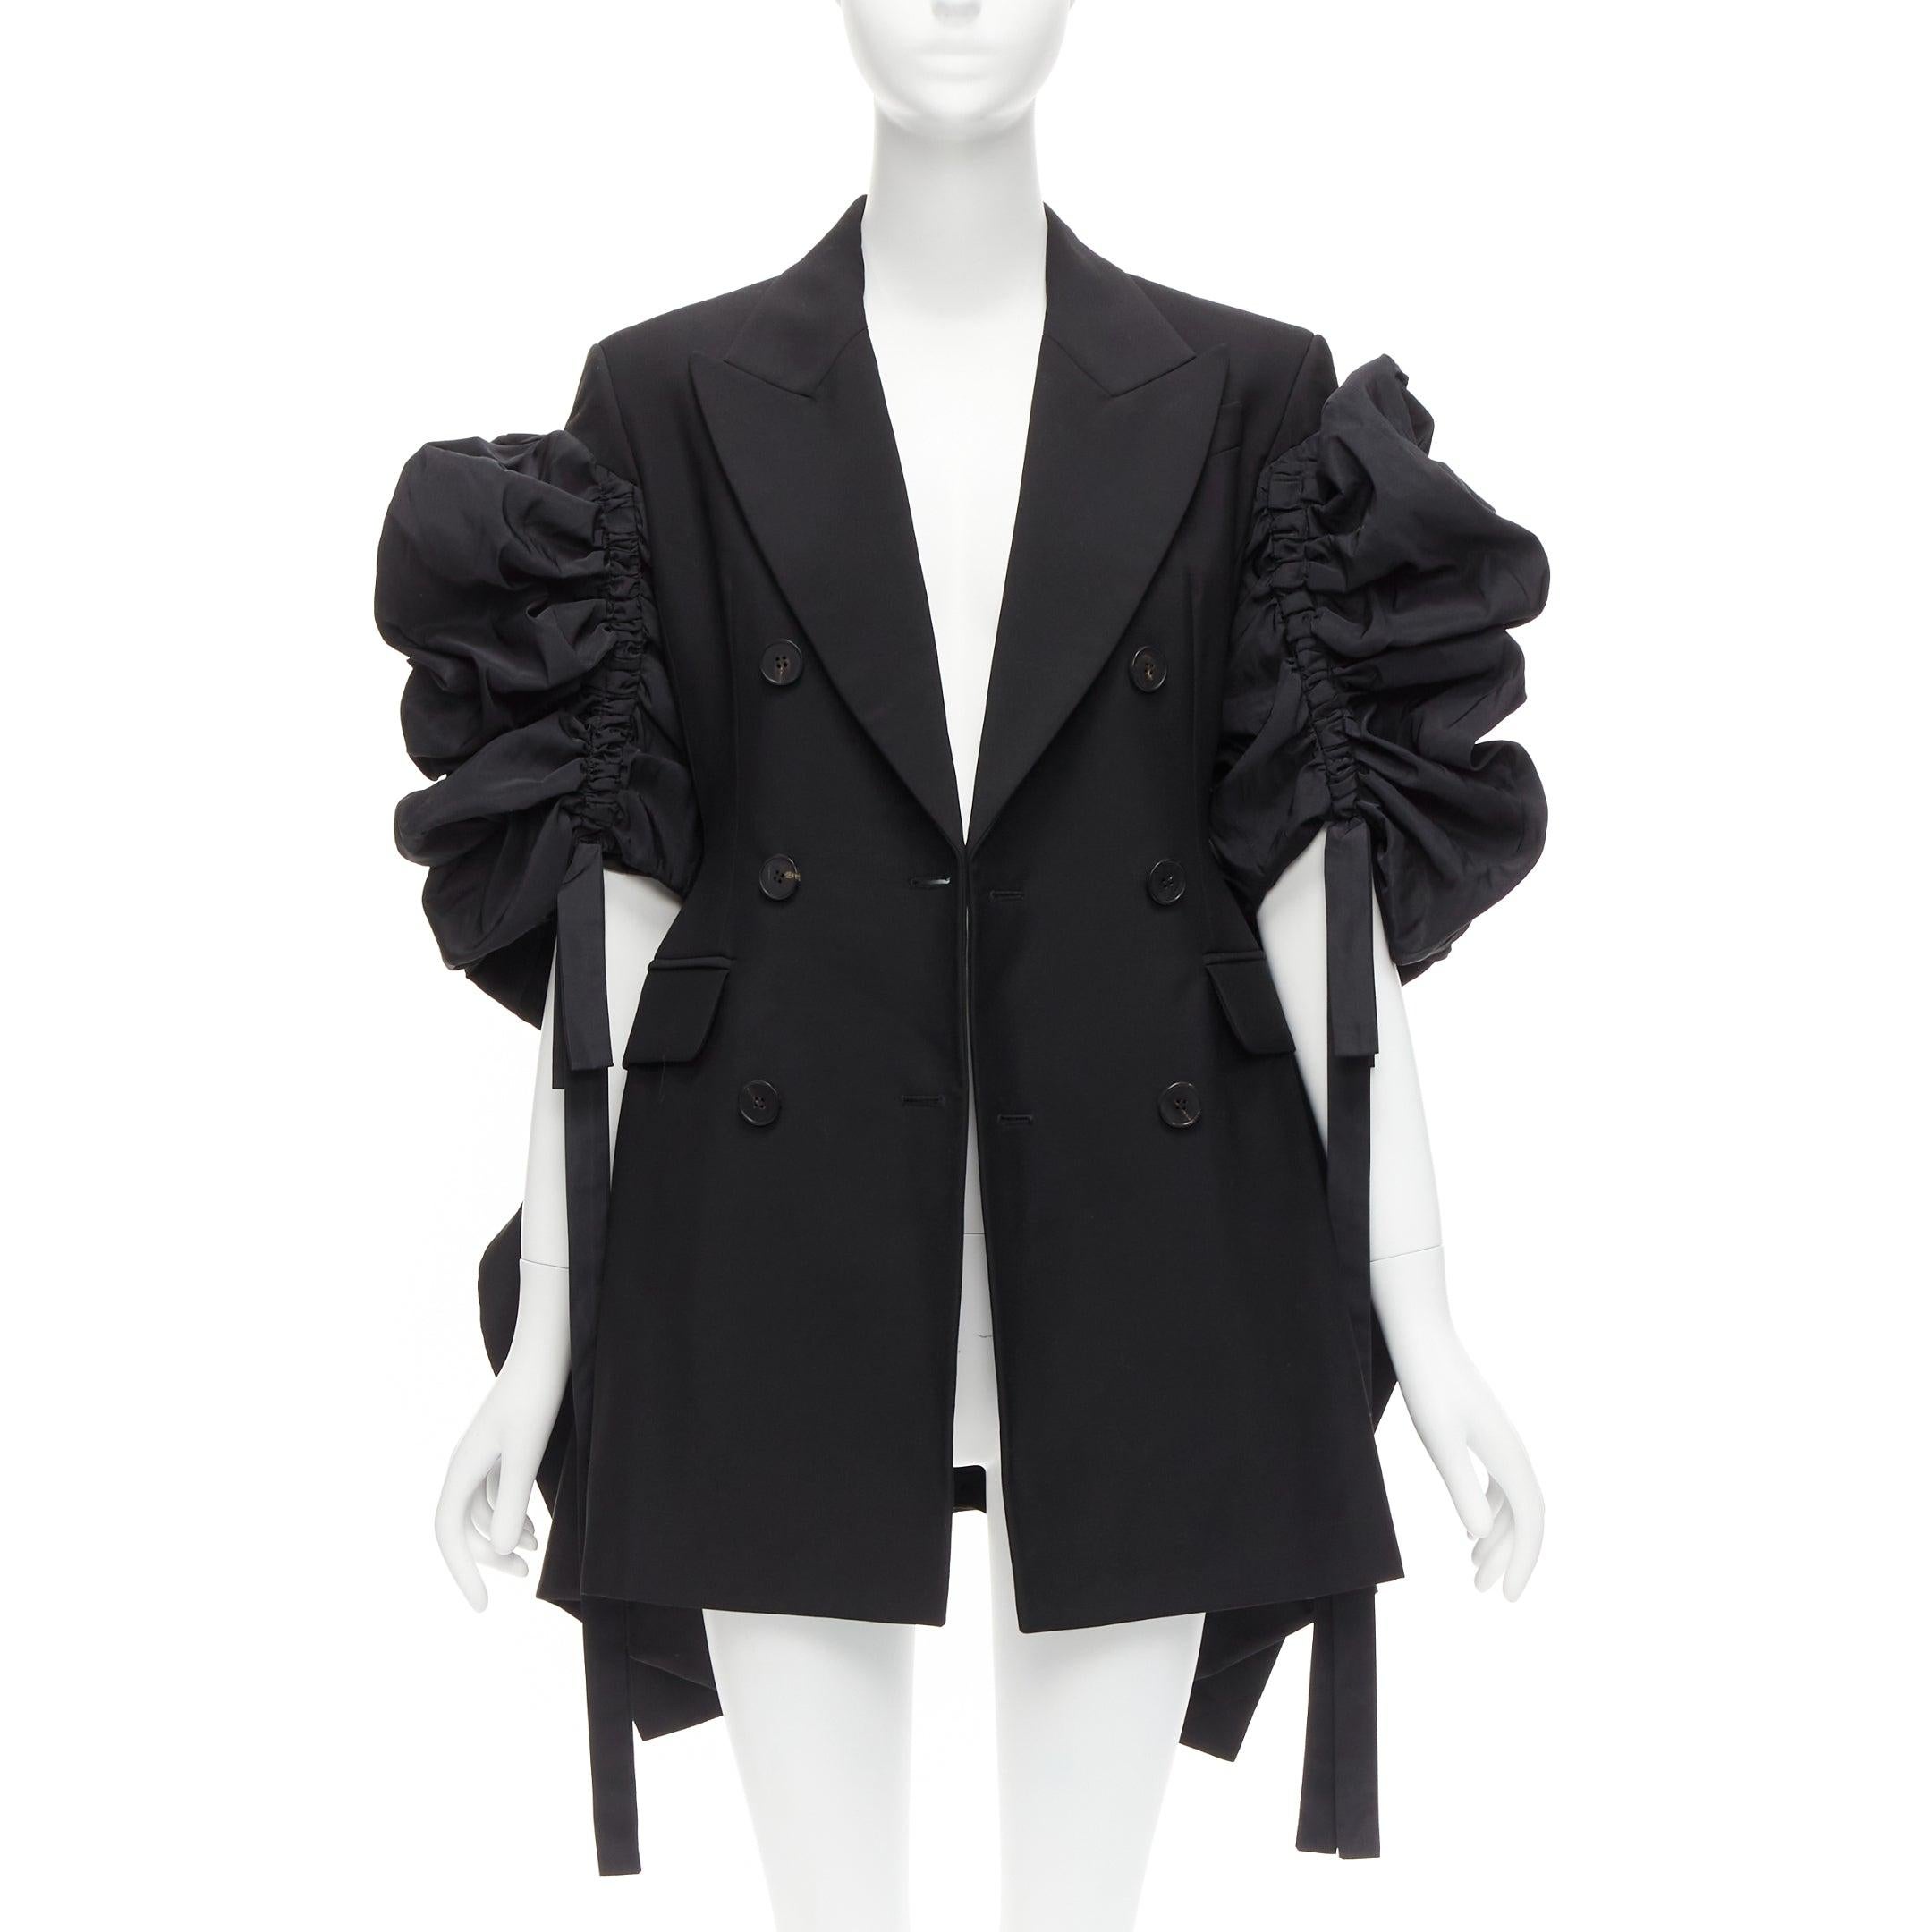 ALEXANDER MCQUEEN 2022 Runway black wool gathered sleeve blazer dress IT38 XS
Reference: AAWC/A00685
Brand: Alexander McQueen
Designer: Sarah Burton
Collection: SS 2022 - Runway
Material: Wool
Color: Black
Pattern: Solid
Closure: Button
Lining: